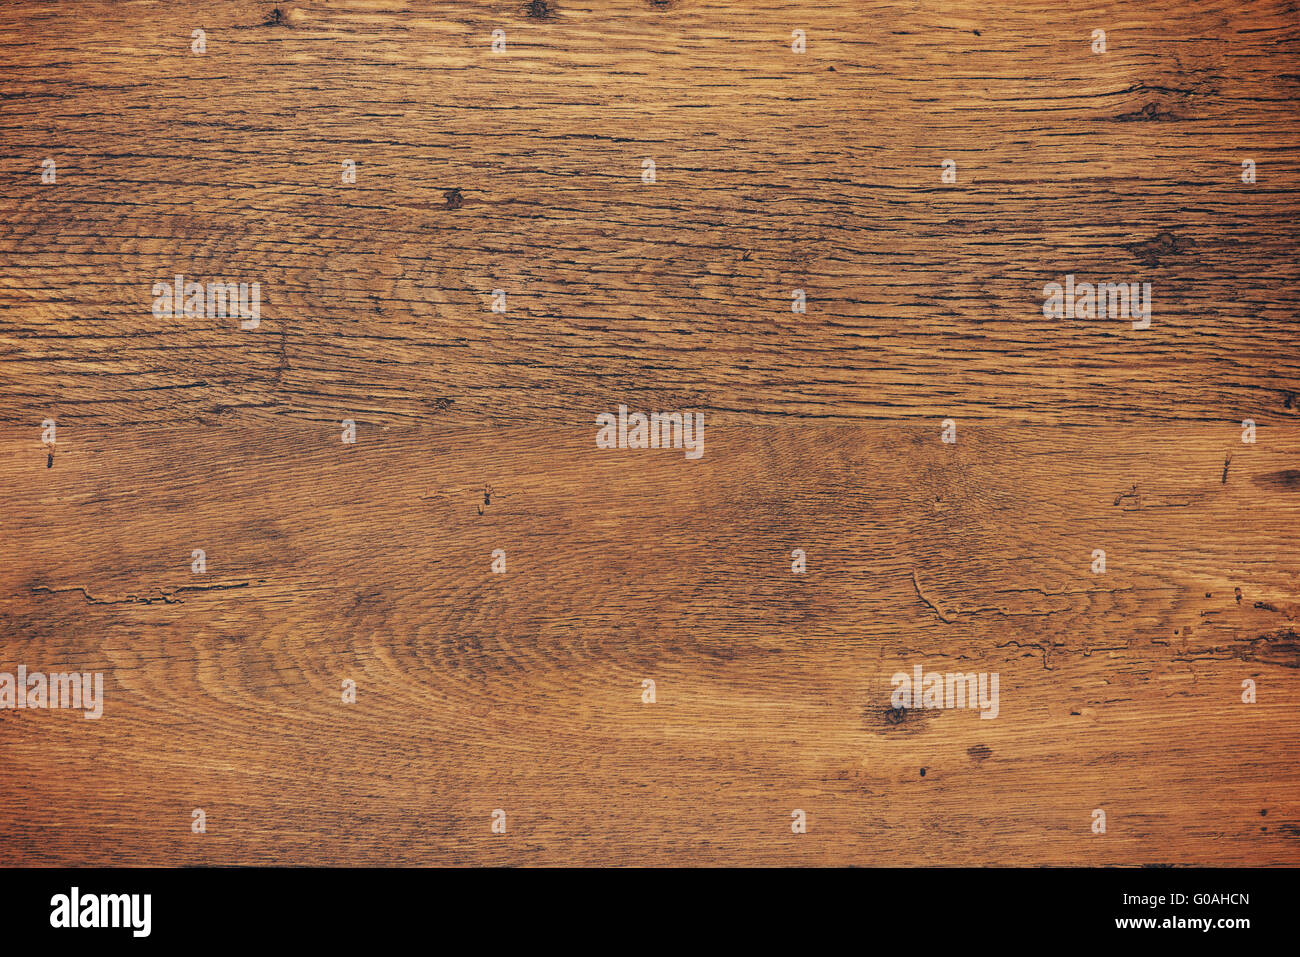 Dark vintage wood texture background with dry rough surface Stock Photo